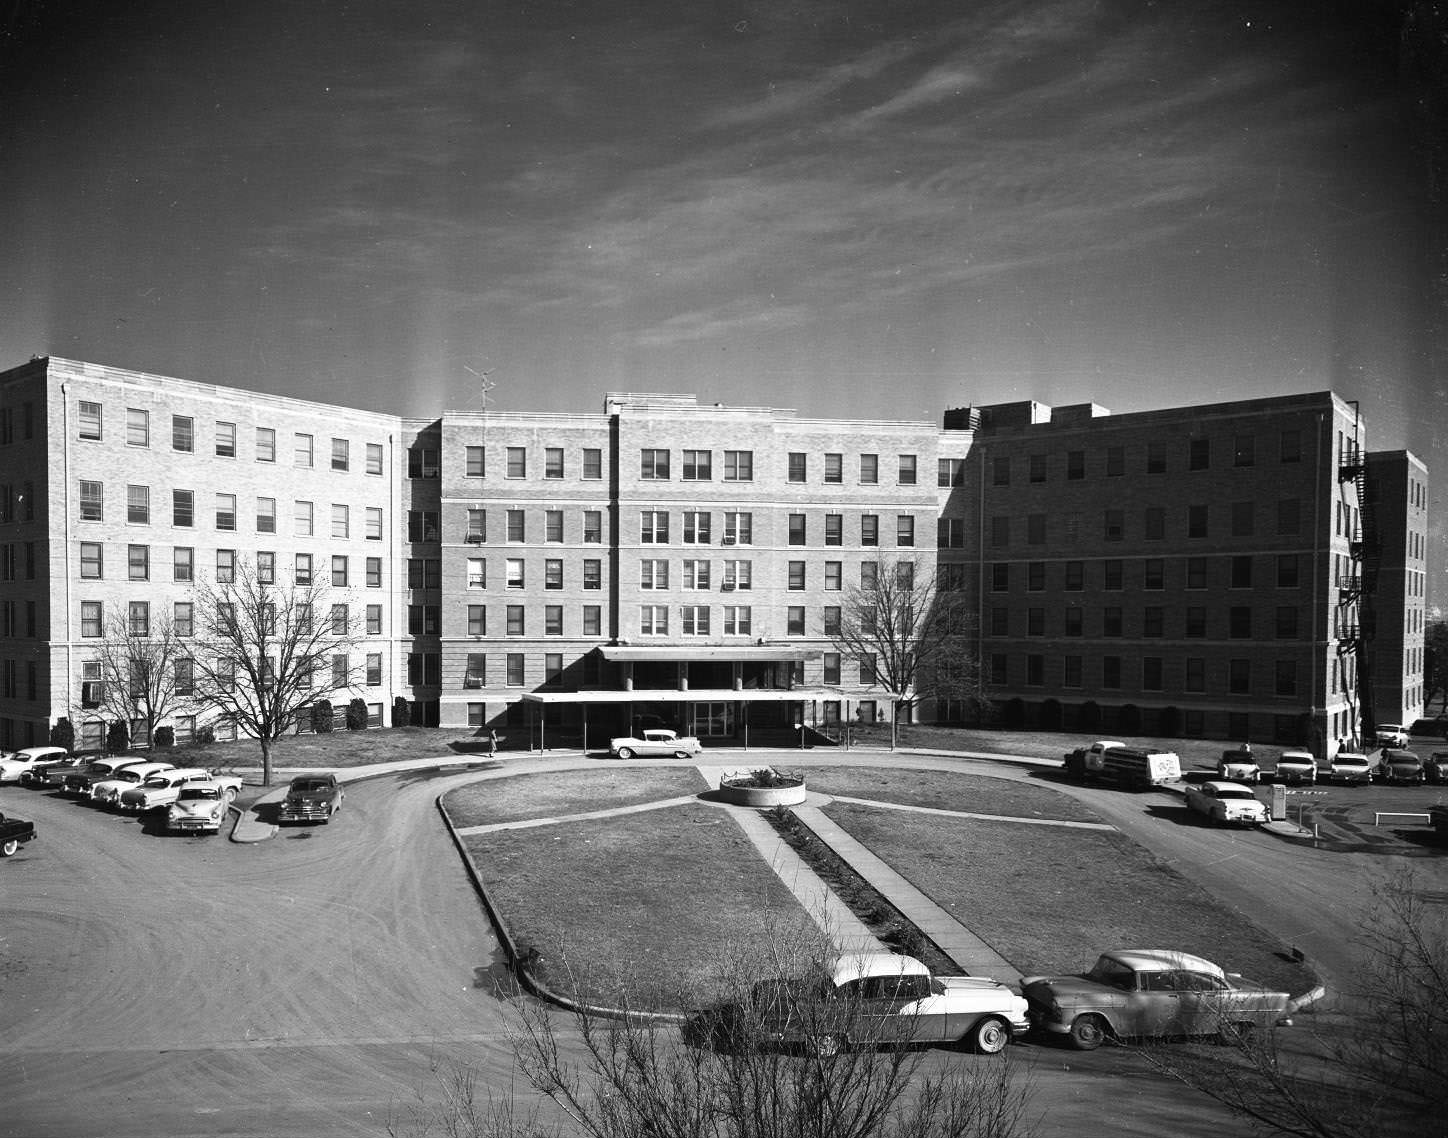 The exterior view of the Hendrick Hospital in Abilene, Texas, 1950s. The building is about six stories high and there are cars parked on the street in front of the hospital.